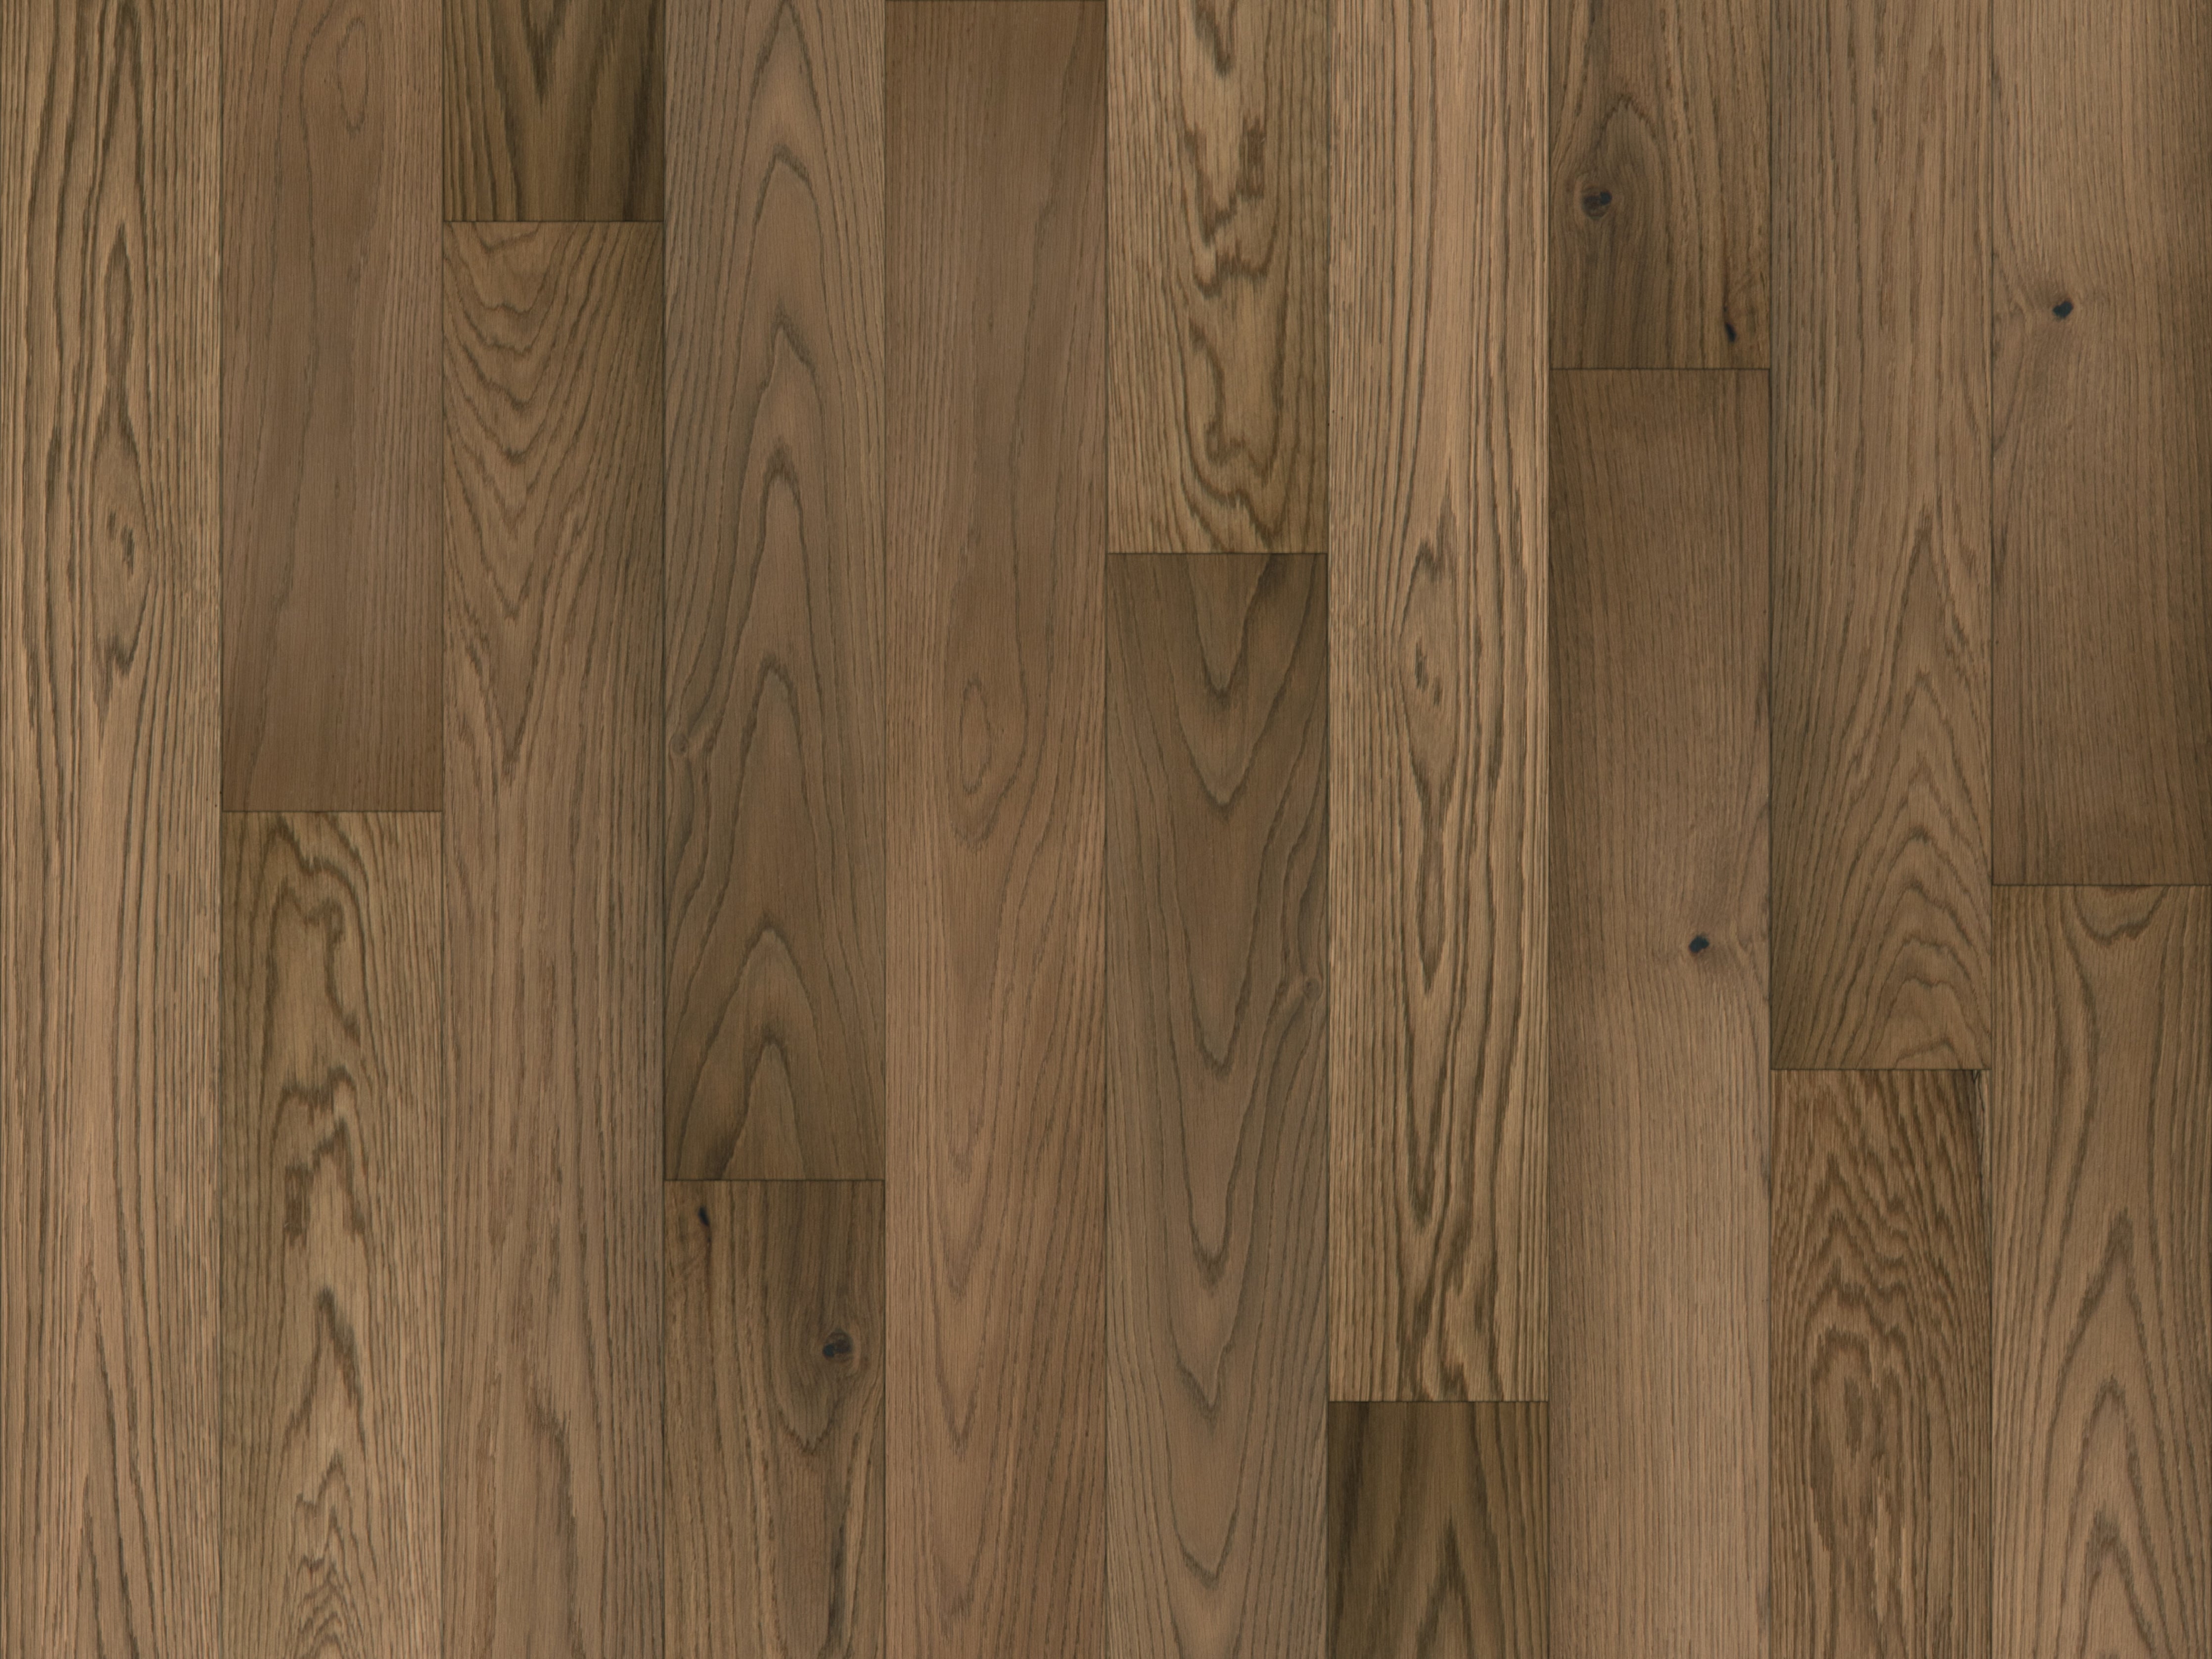 duchateau the guild lineage maddie european oak engineered hardnatural wood floor uv lacquer finish for interior use distributed by surface group international